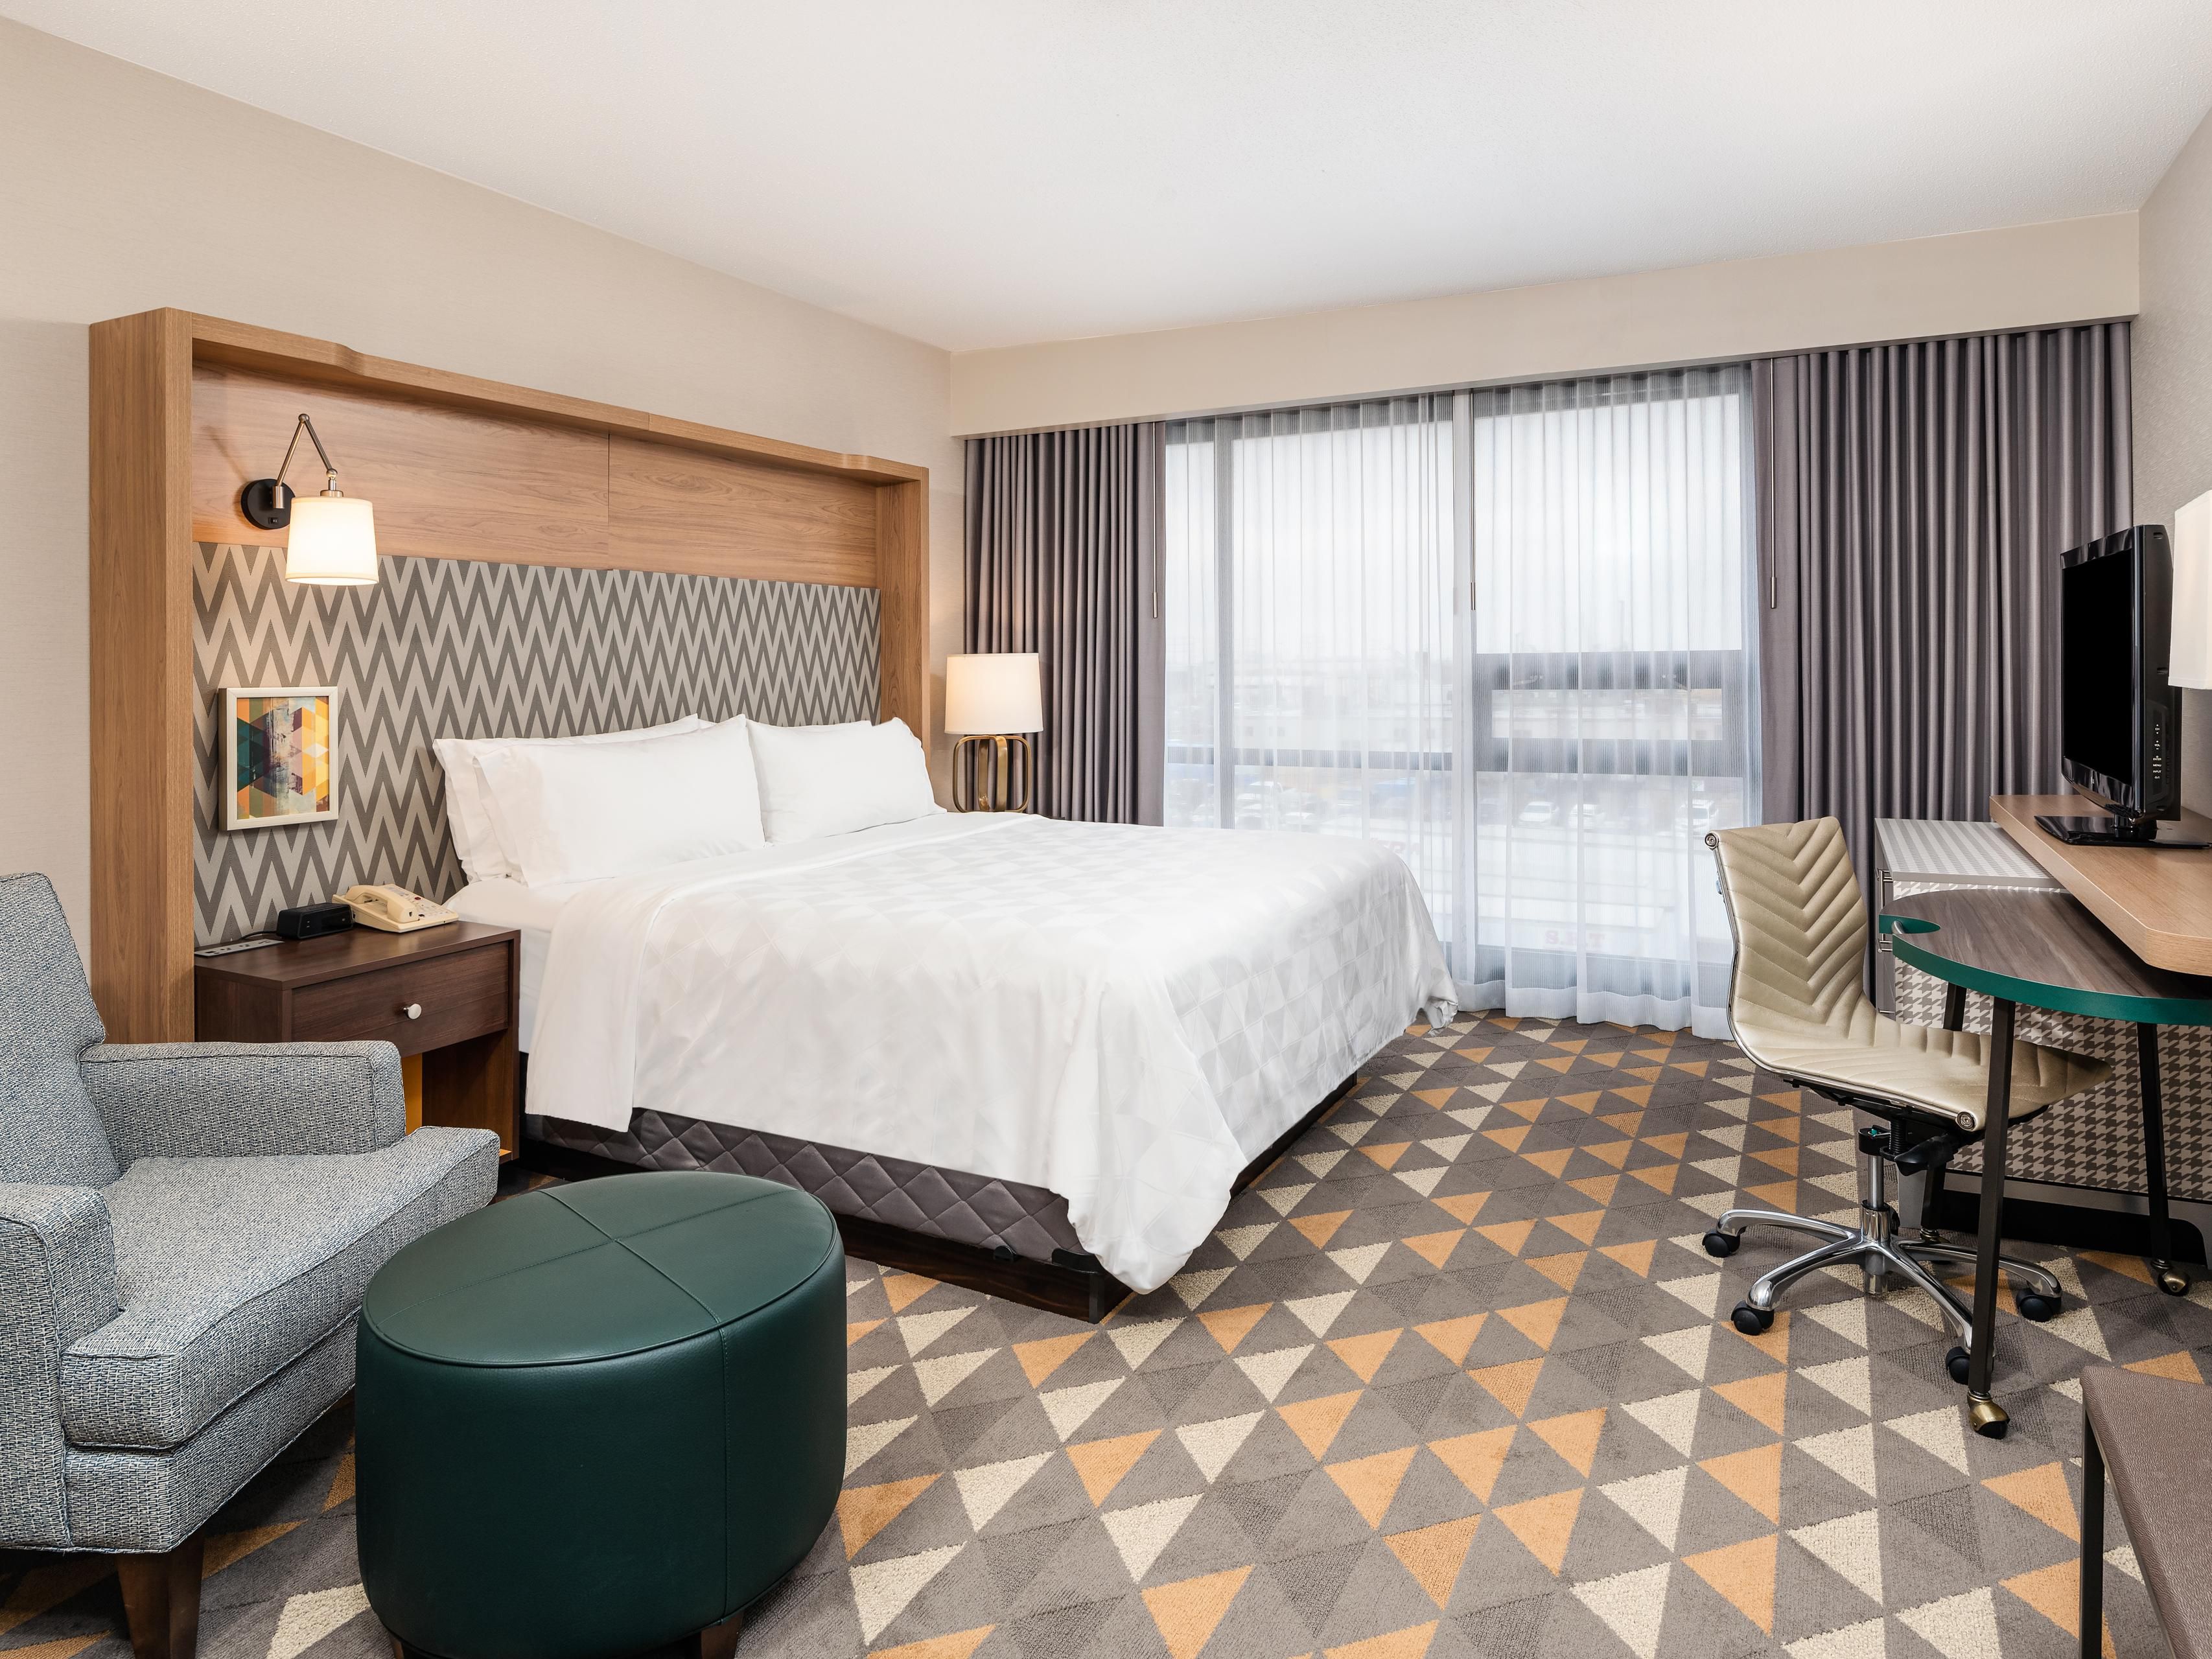 Take a tour of our spacious king size bedded rooms at the Holiday Inn Toronto Airport East. Large work desk area ensures you can get work done while away from the office.